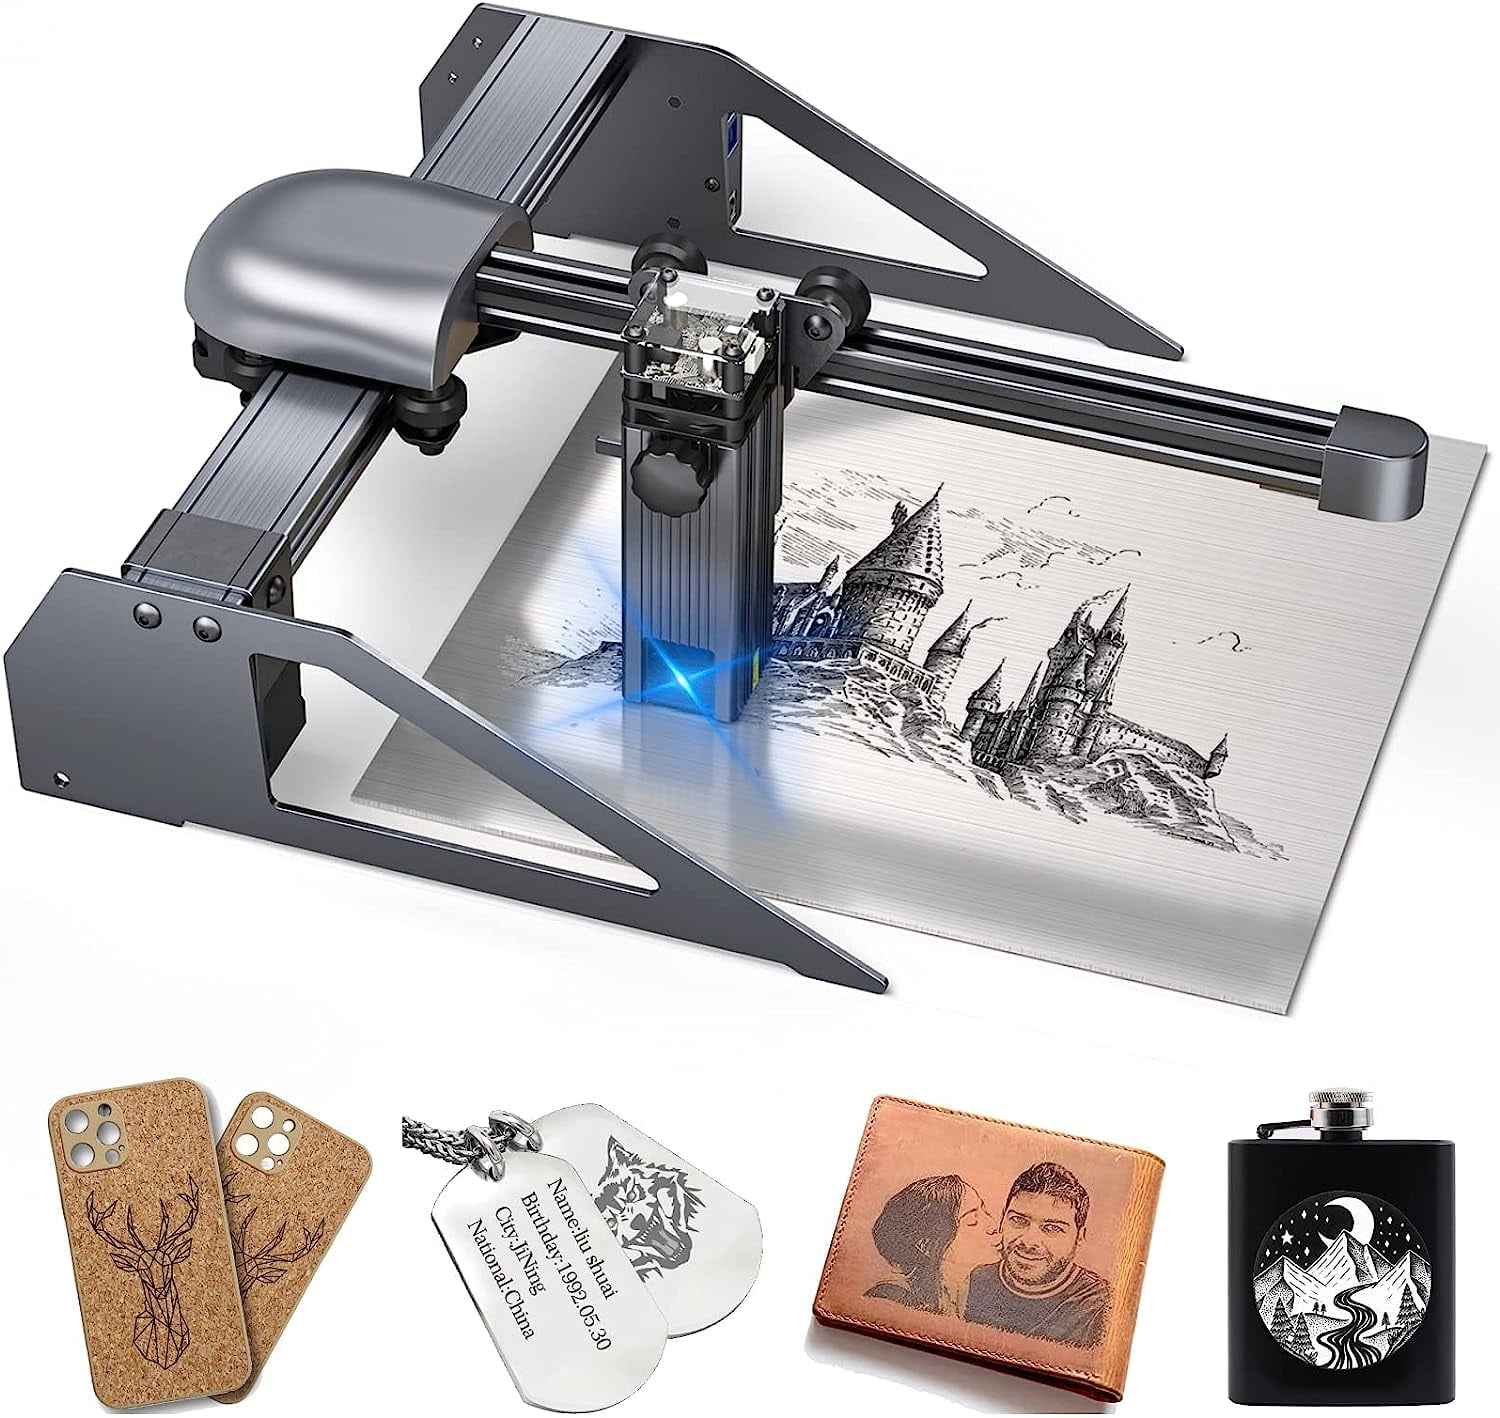 ATOMSTACK P7 Laser Engraver 40W Laser Cutter and Engraver Machine 5.5  WFixed-Focus Eye Protection DIY Engraver Tool for Metal, Wood, Leather,  Vinyl, Area(7.87x7.87) 